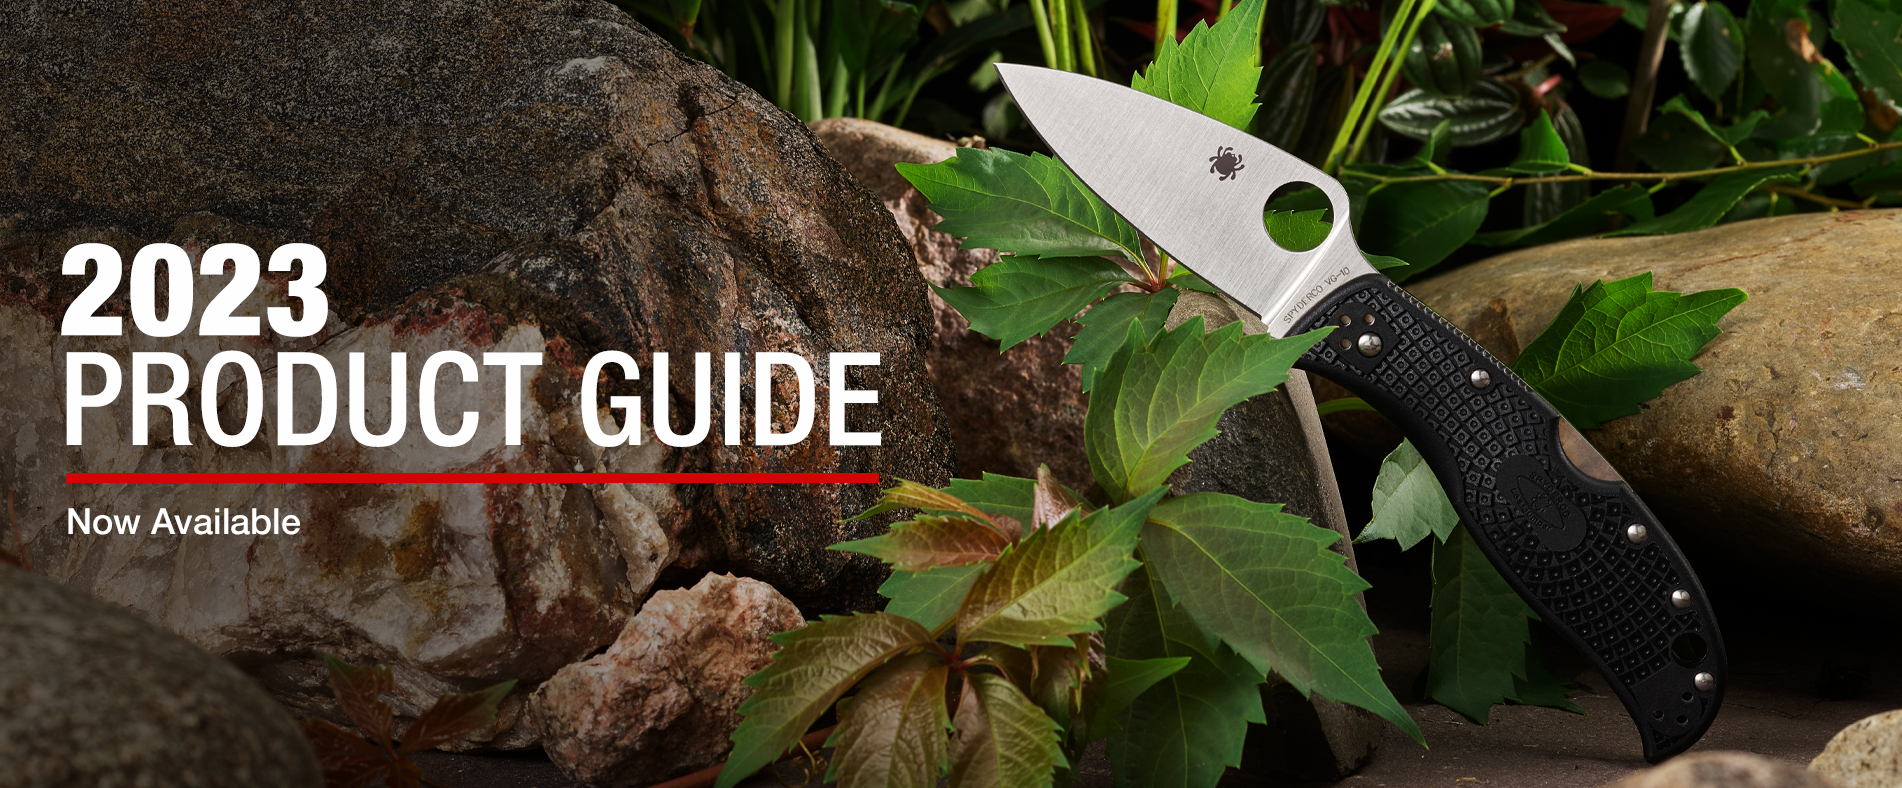 2023 Spyderco Product Guide Now Available